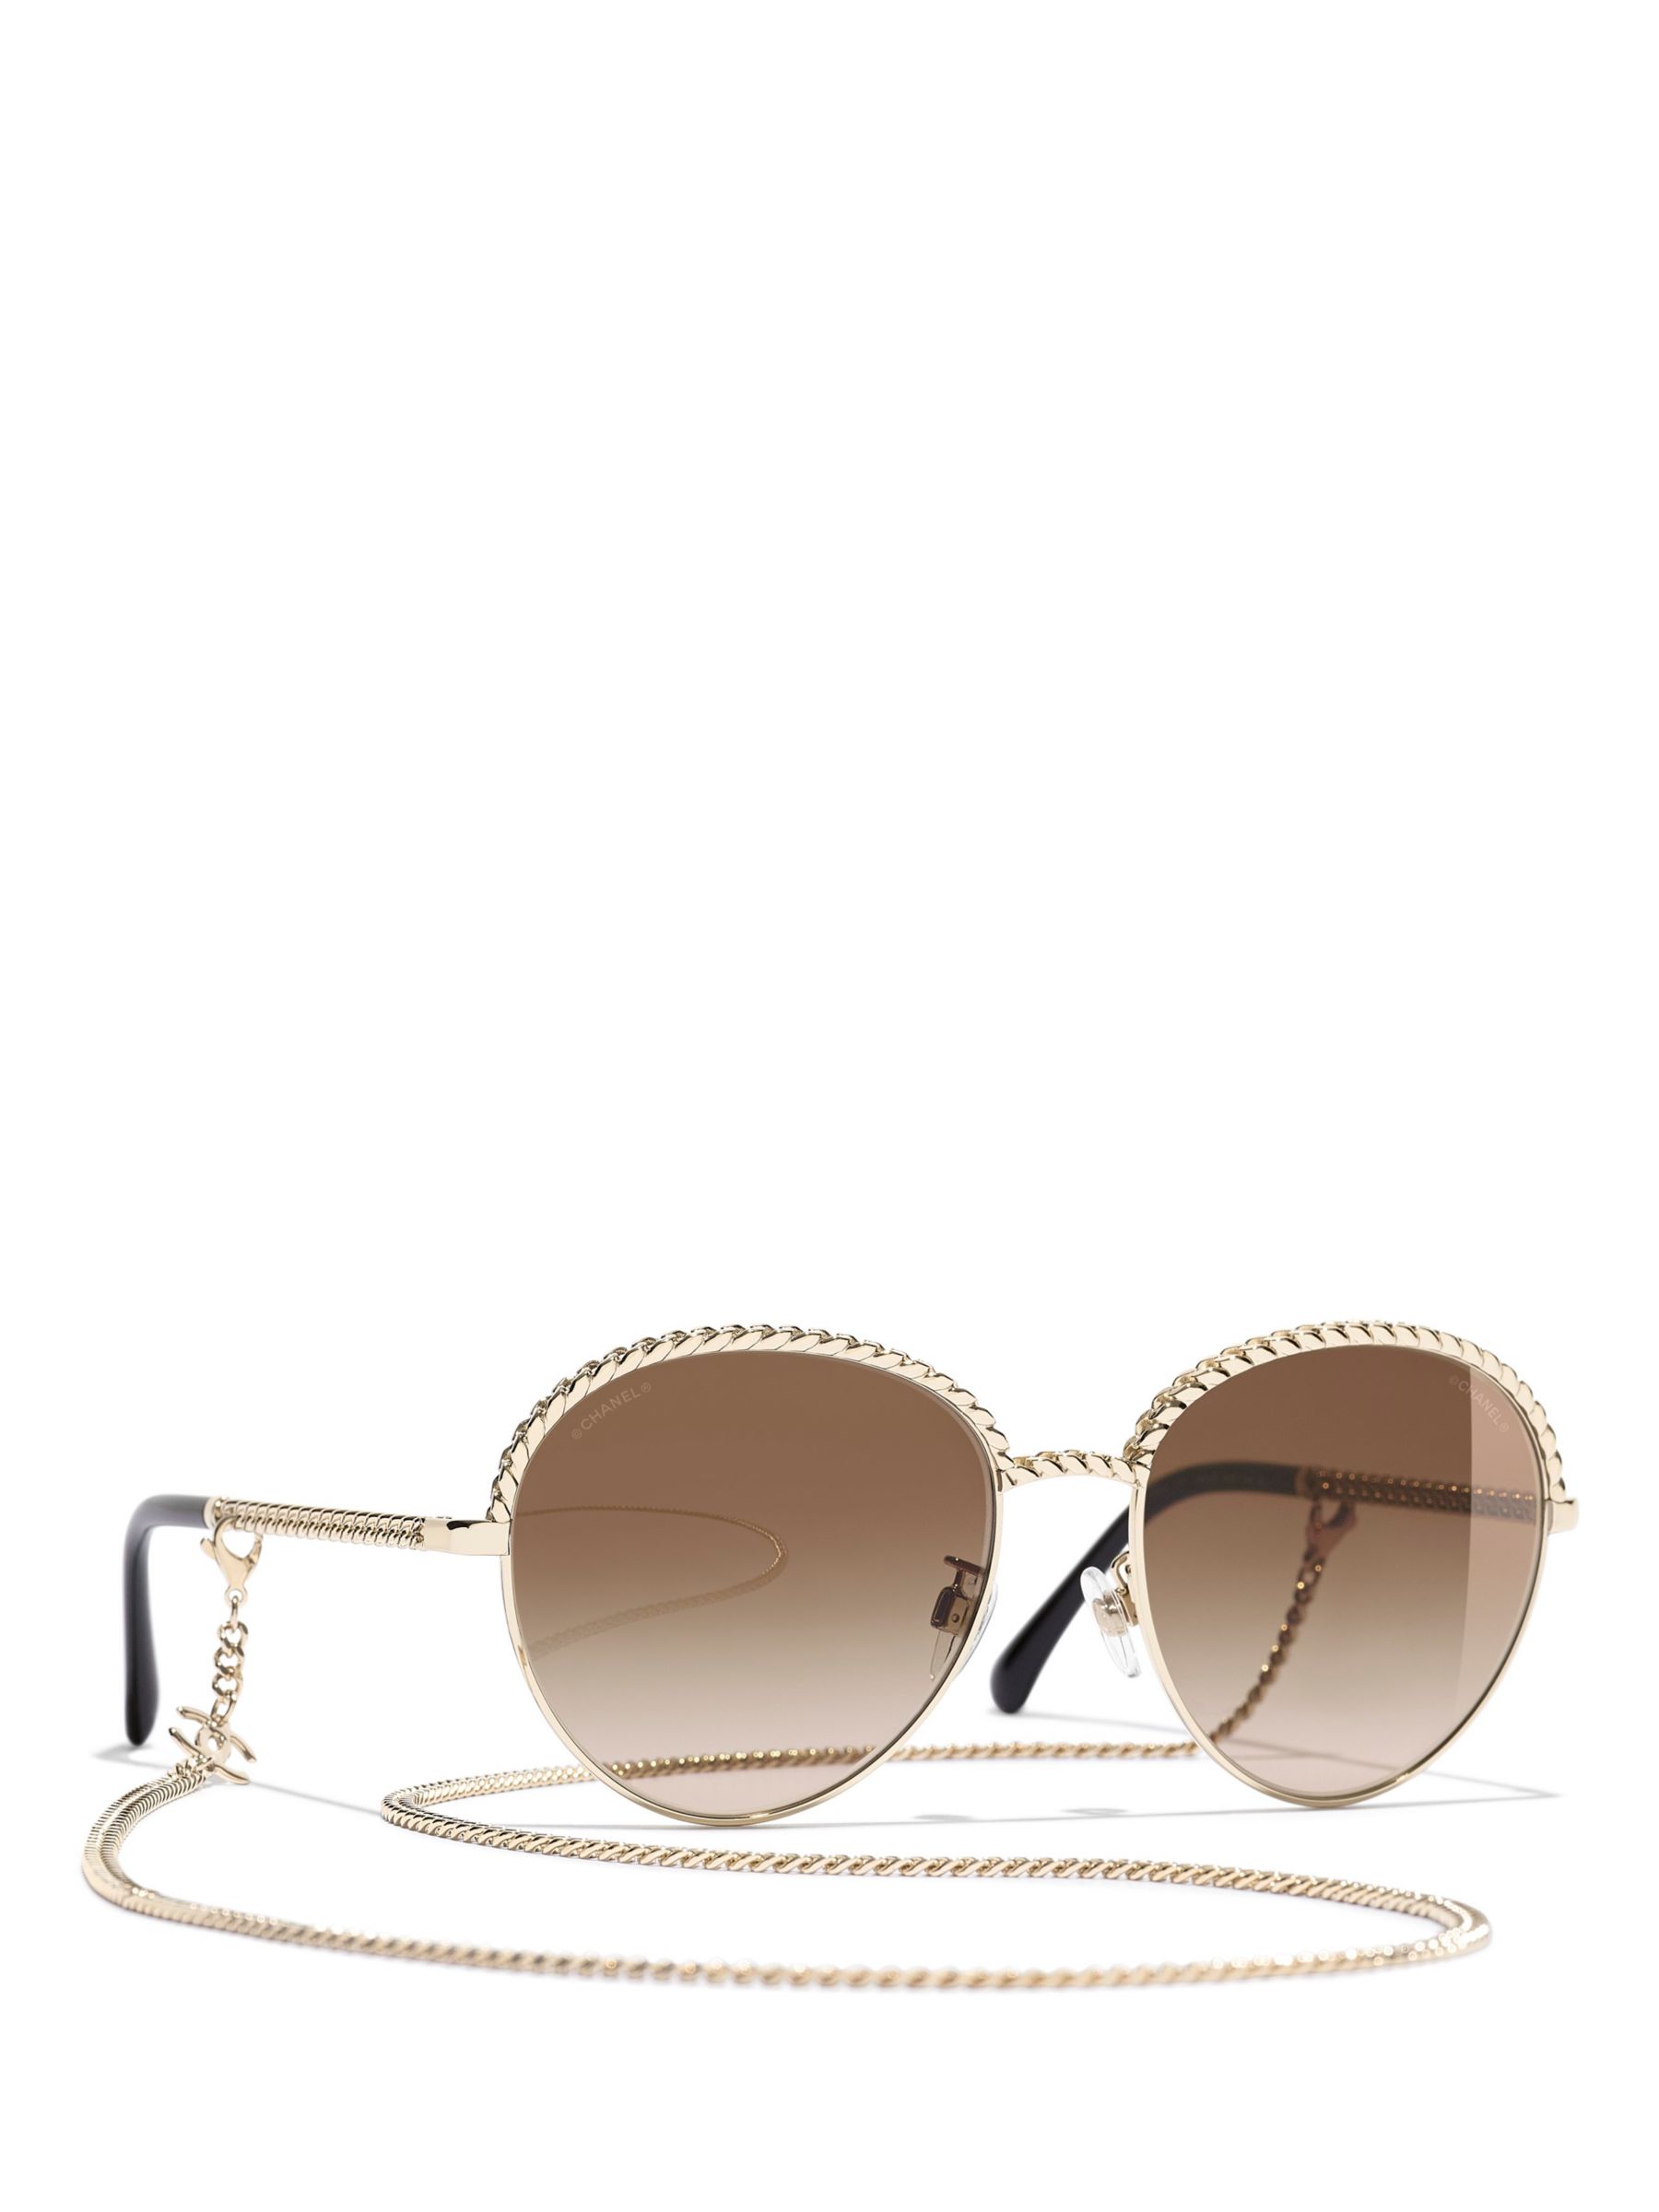 CHANEL Oval Sunglasses CH4242 Pale Gold/Brown Gradient at John